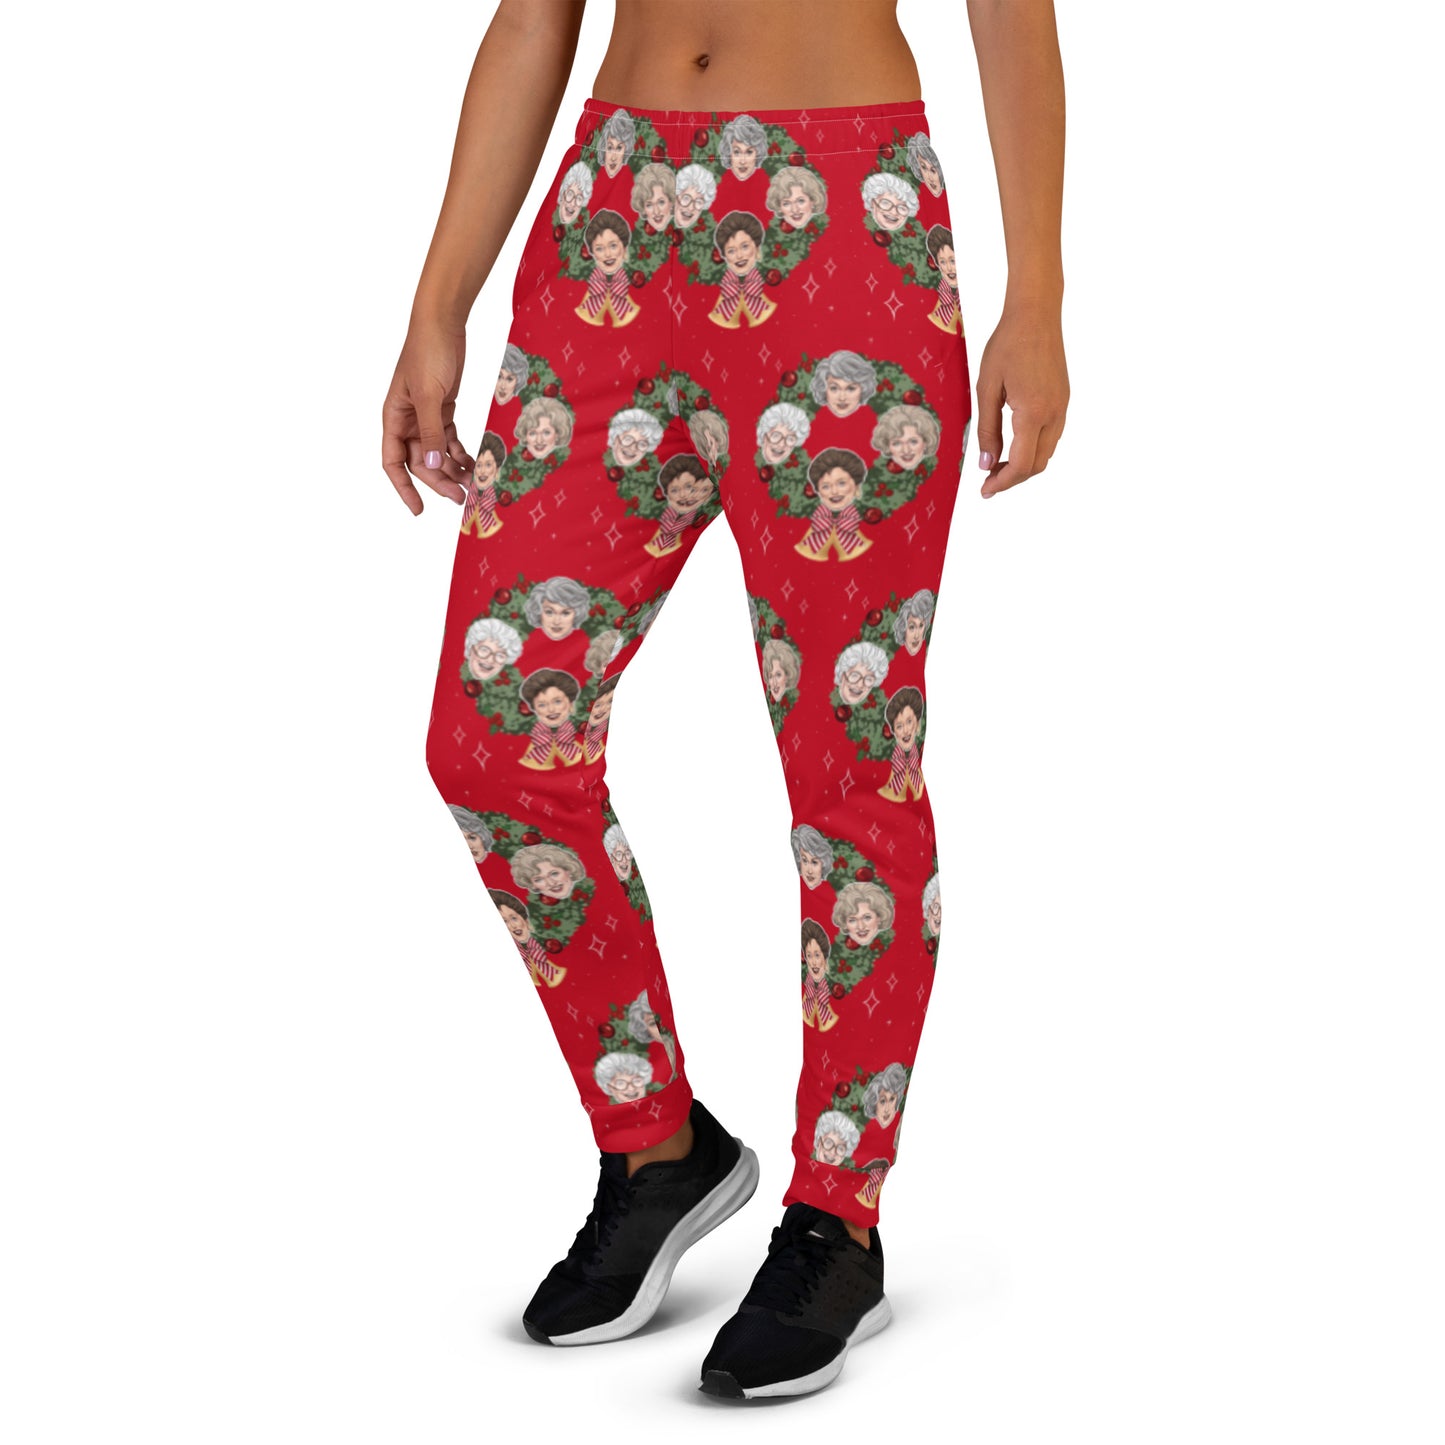 “The Merry in Miami” Women's Joggers